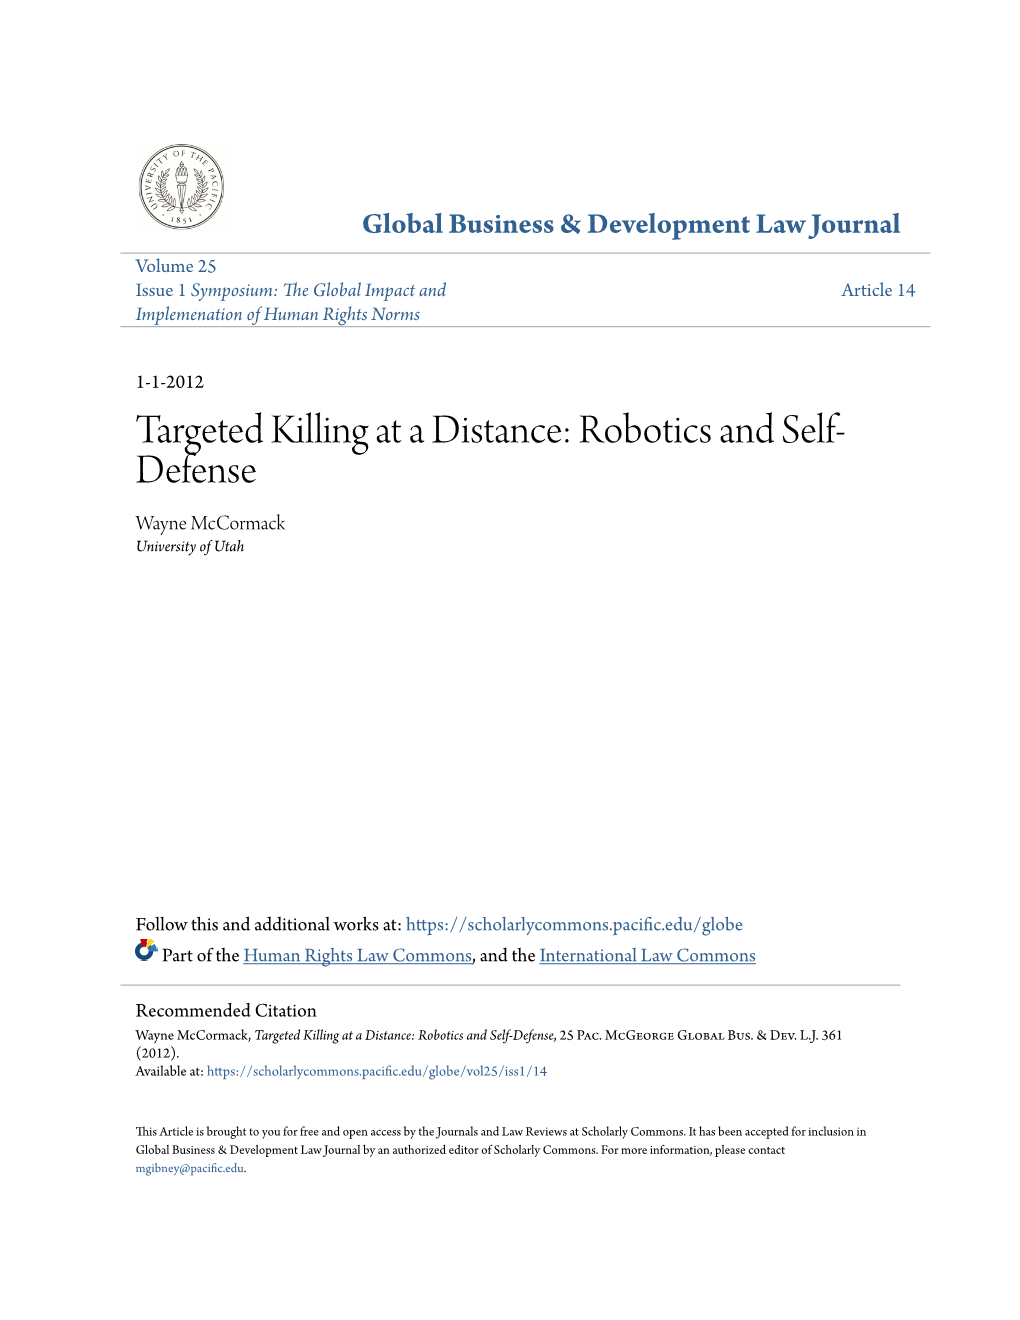 Targeted Killing at a Distance: Robotics and Self-Defense, 25 Pac